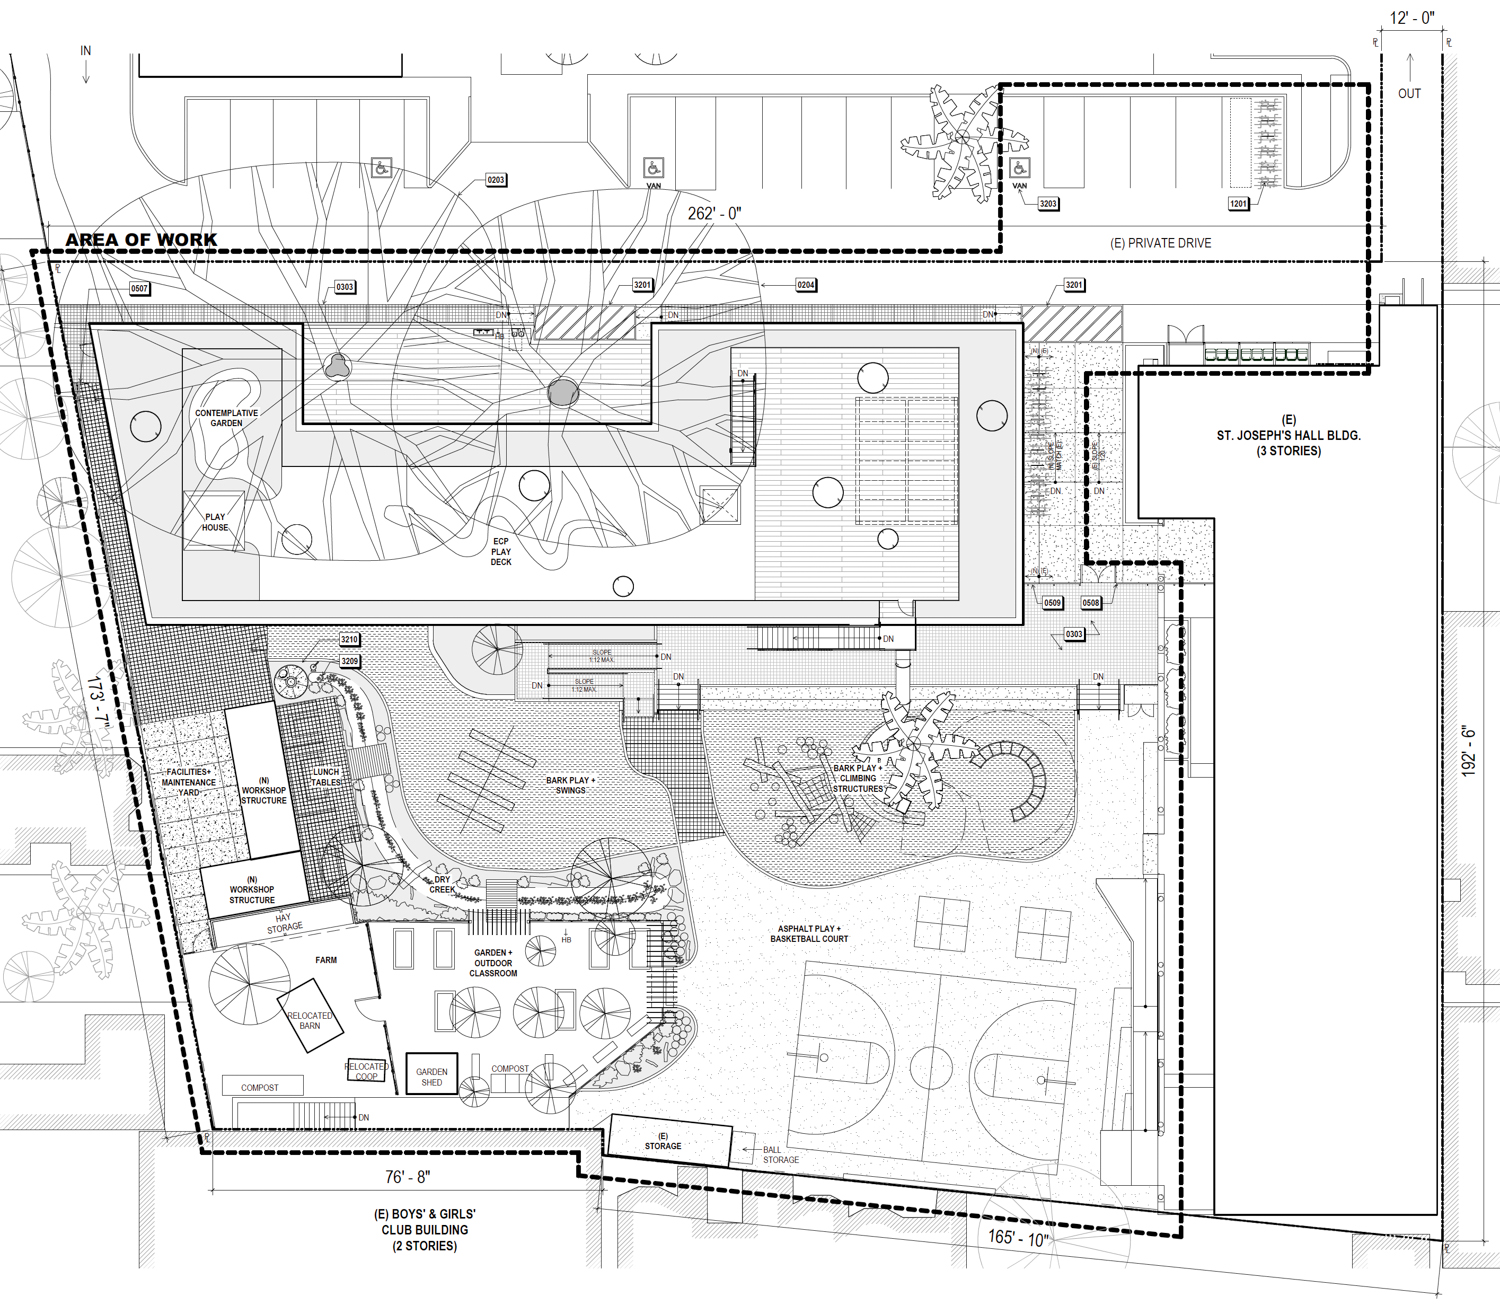 333 Dolores Street site landscaping map, rendering by Jensen Architects